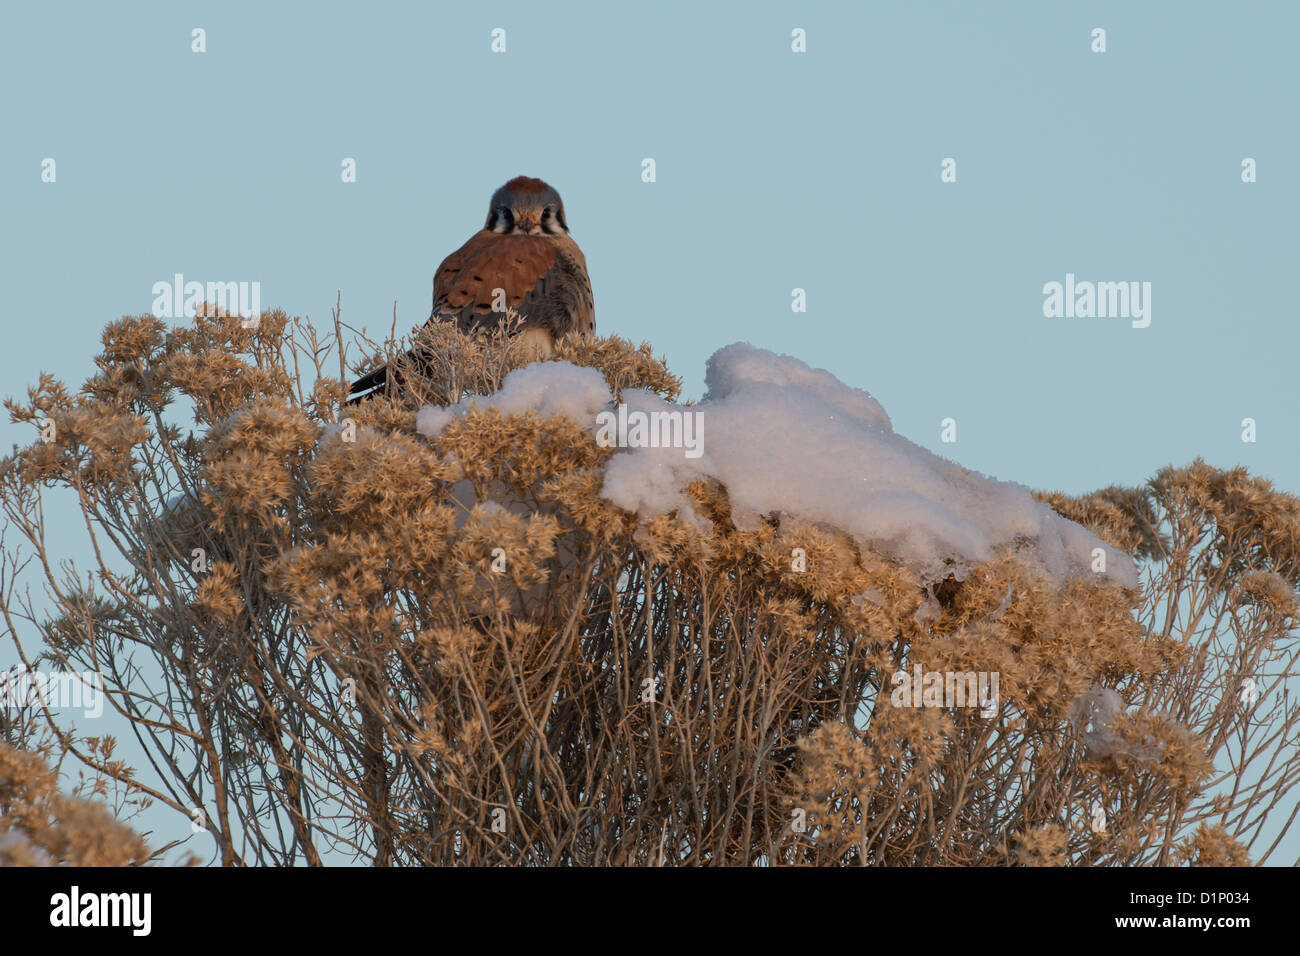 Stock photo of a kestrel sitting on top of a rabbitbrush. Stock Photo